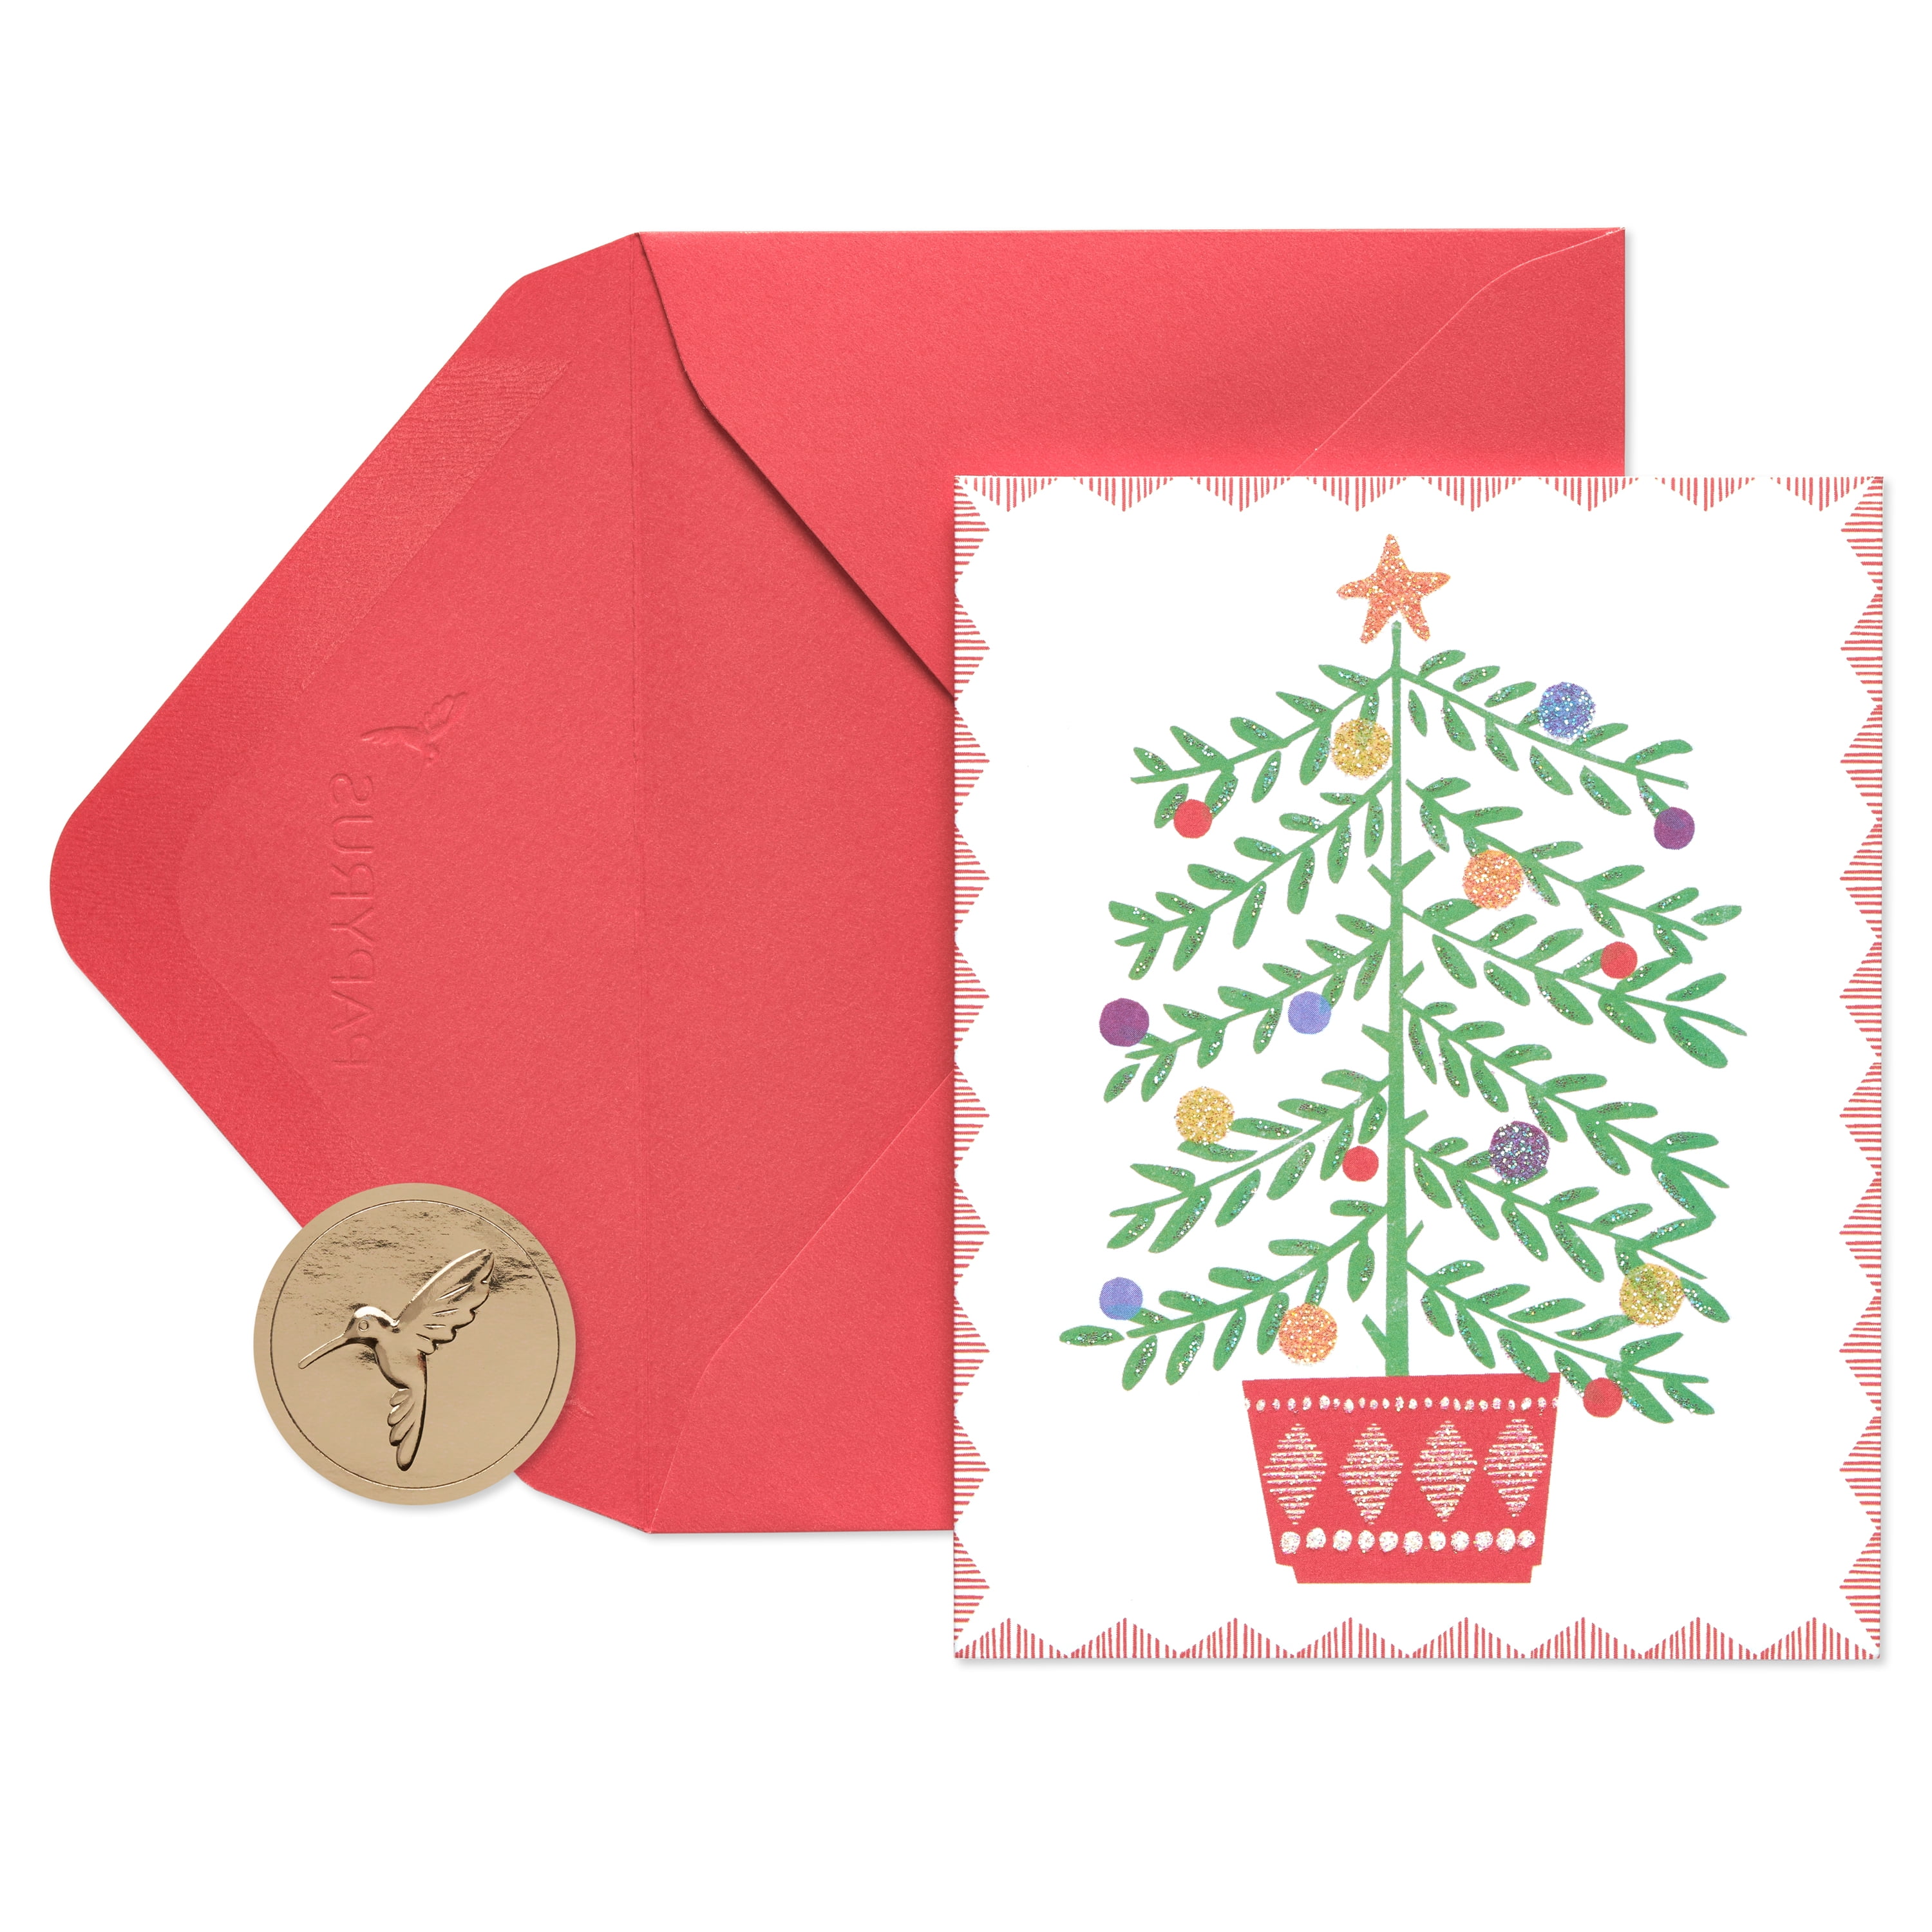 Papyrus Christmas Cards Boxed 8-Count Handmade Holiday Ornament 